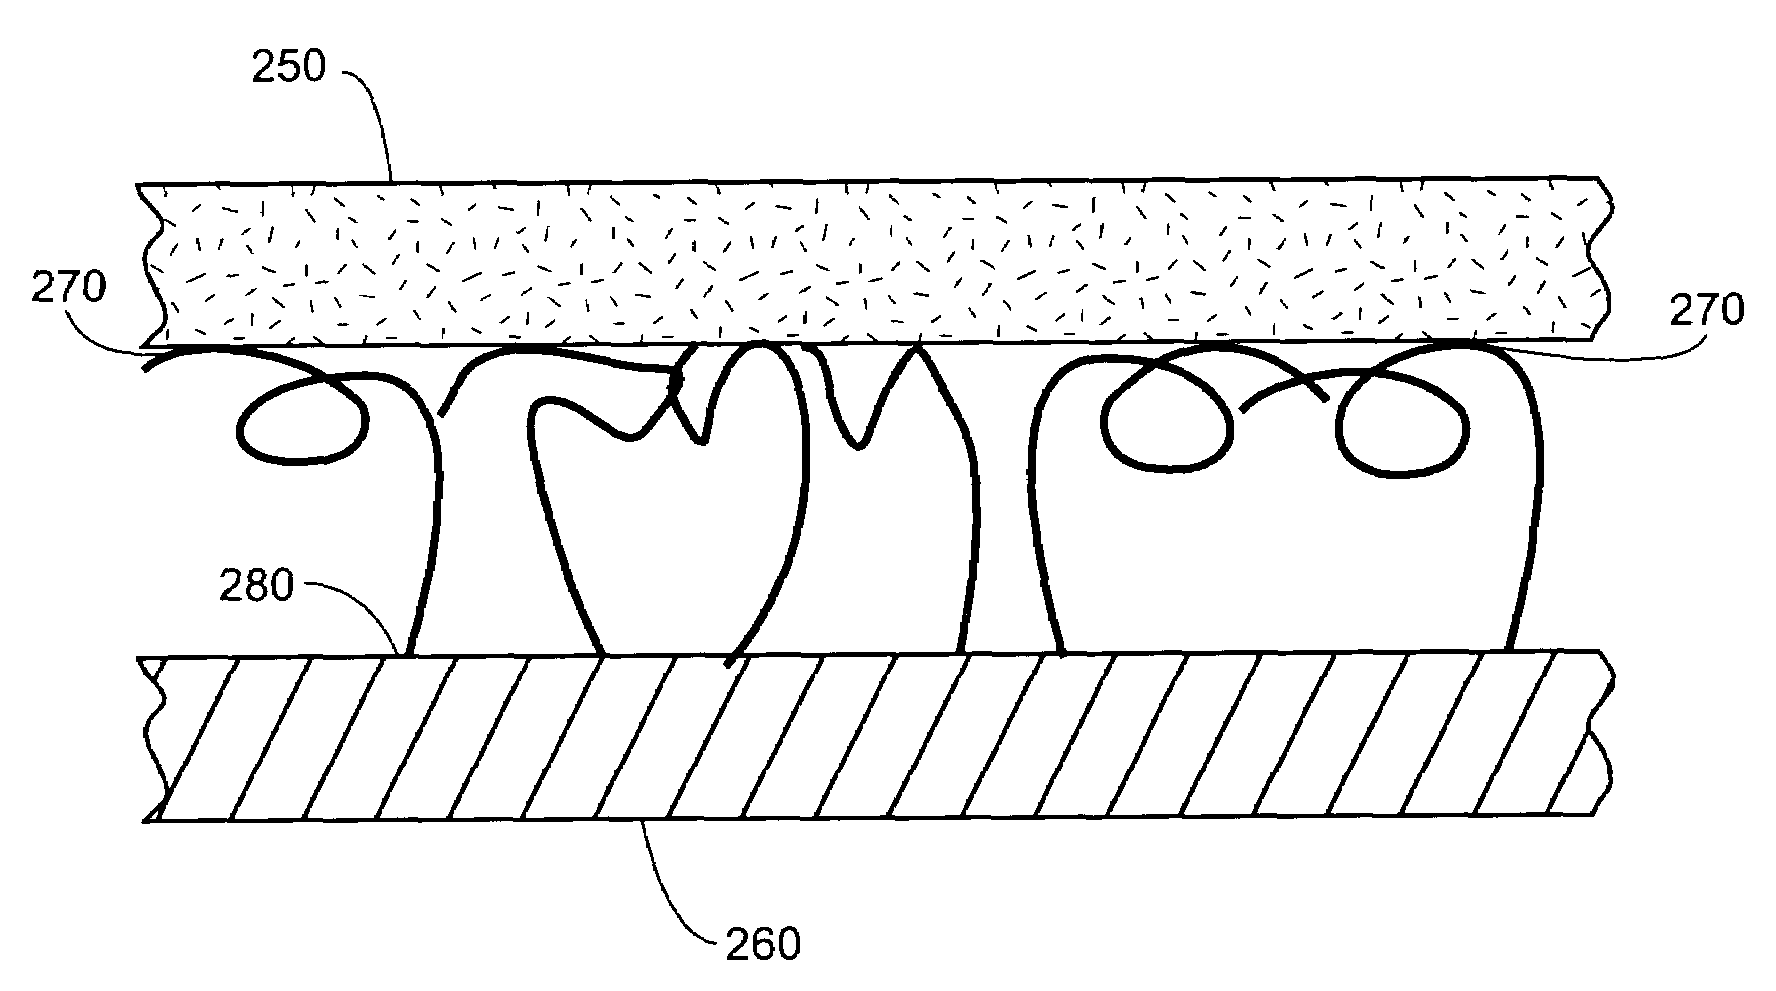 Structures, systems and methods for joining articles and materials and uses therefor